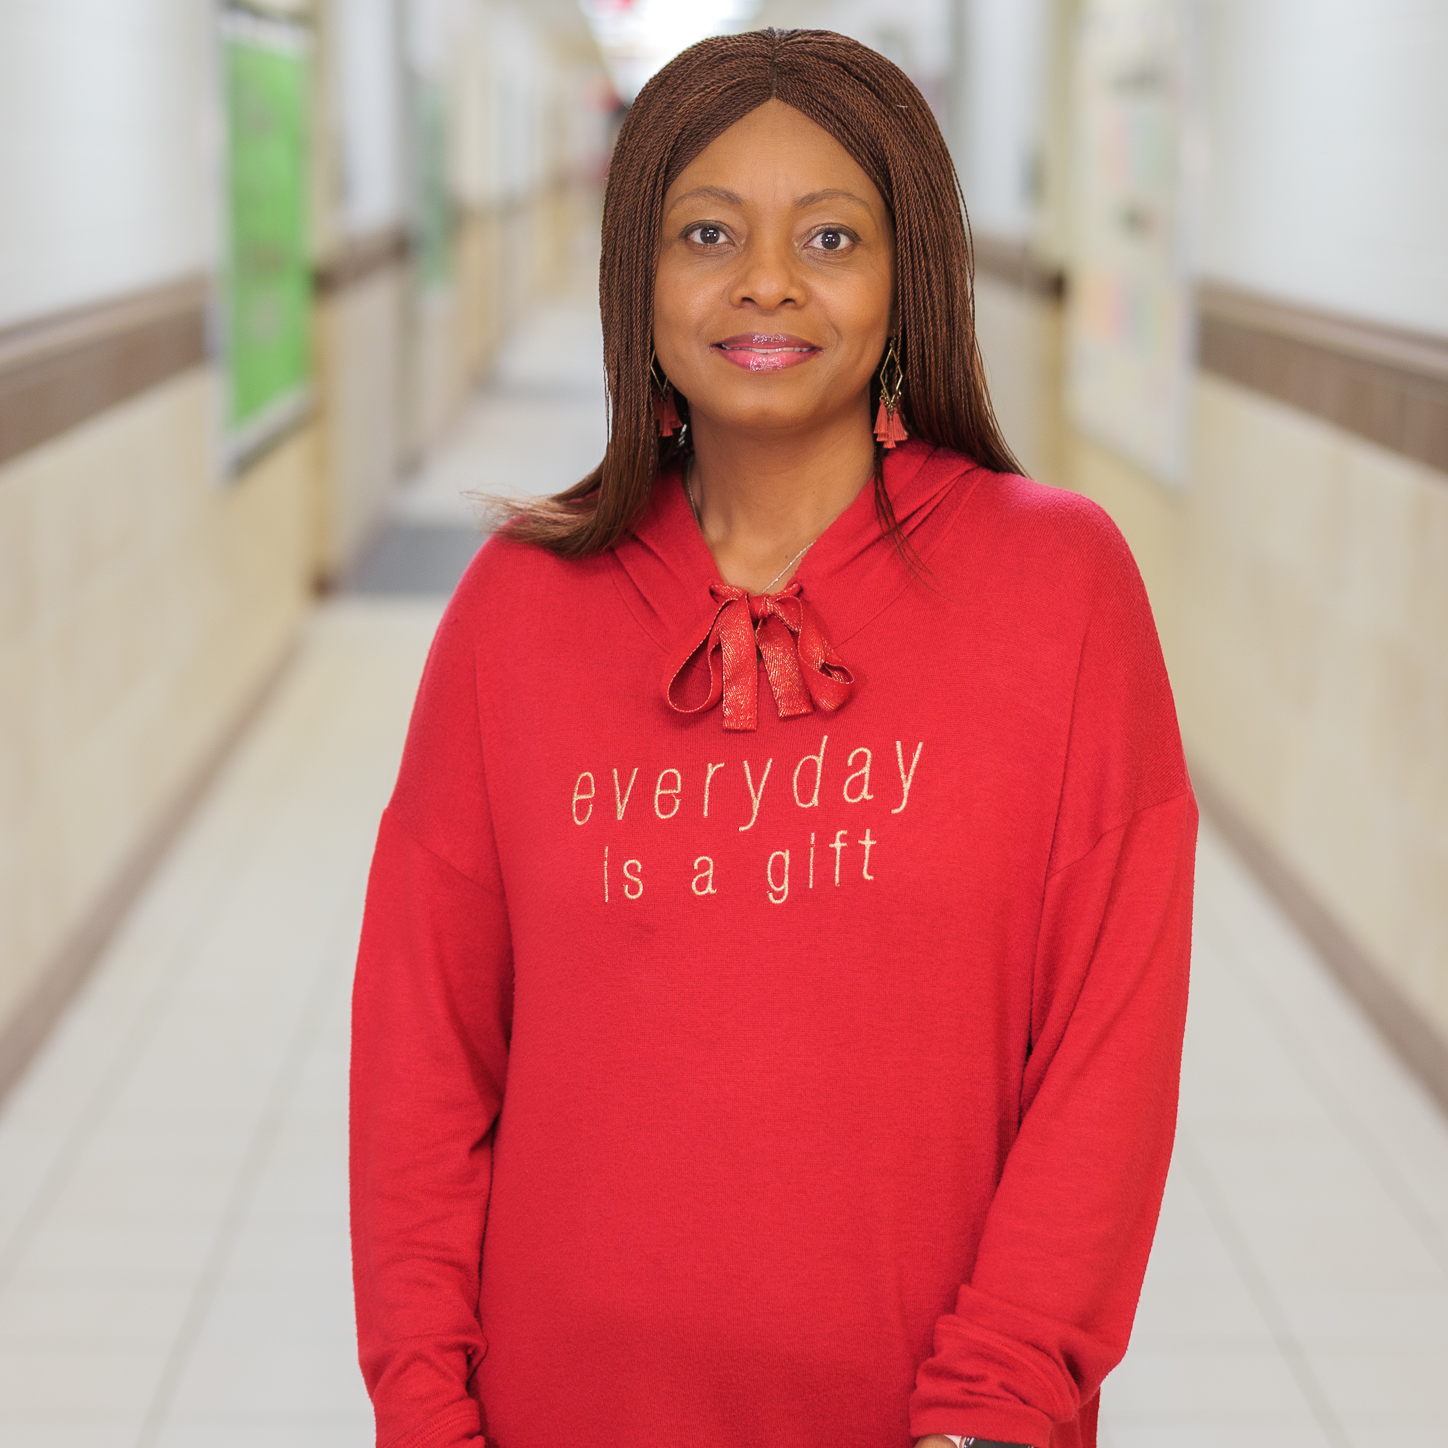 African American woman wearing a red sweatshirt standing in a hallway